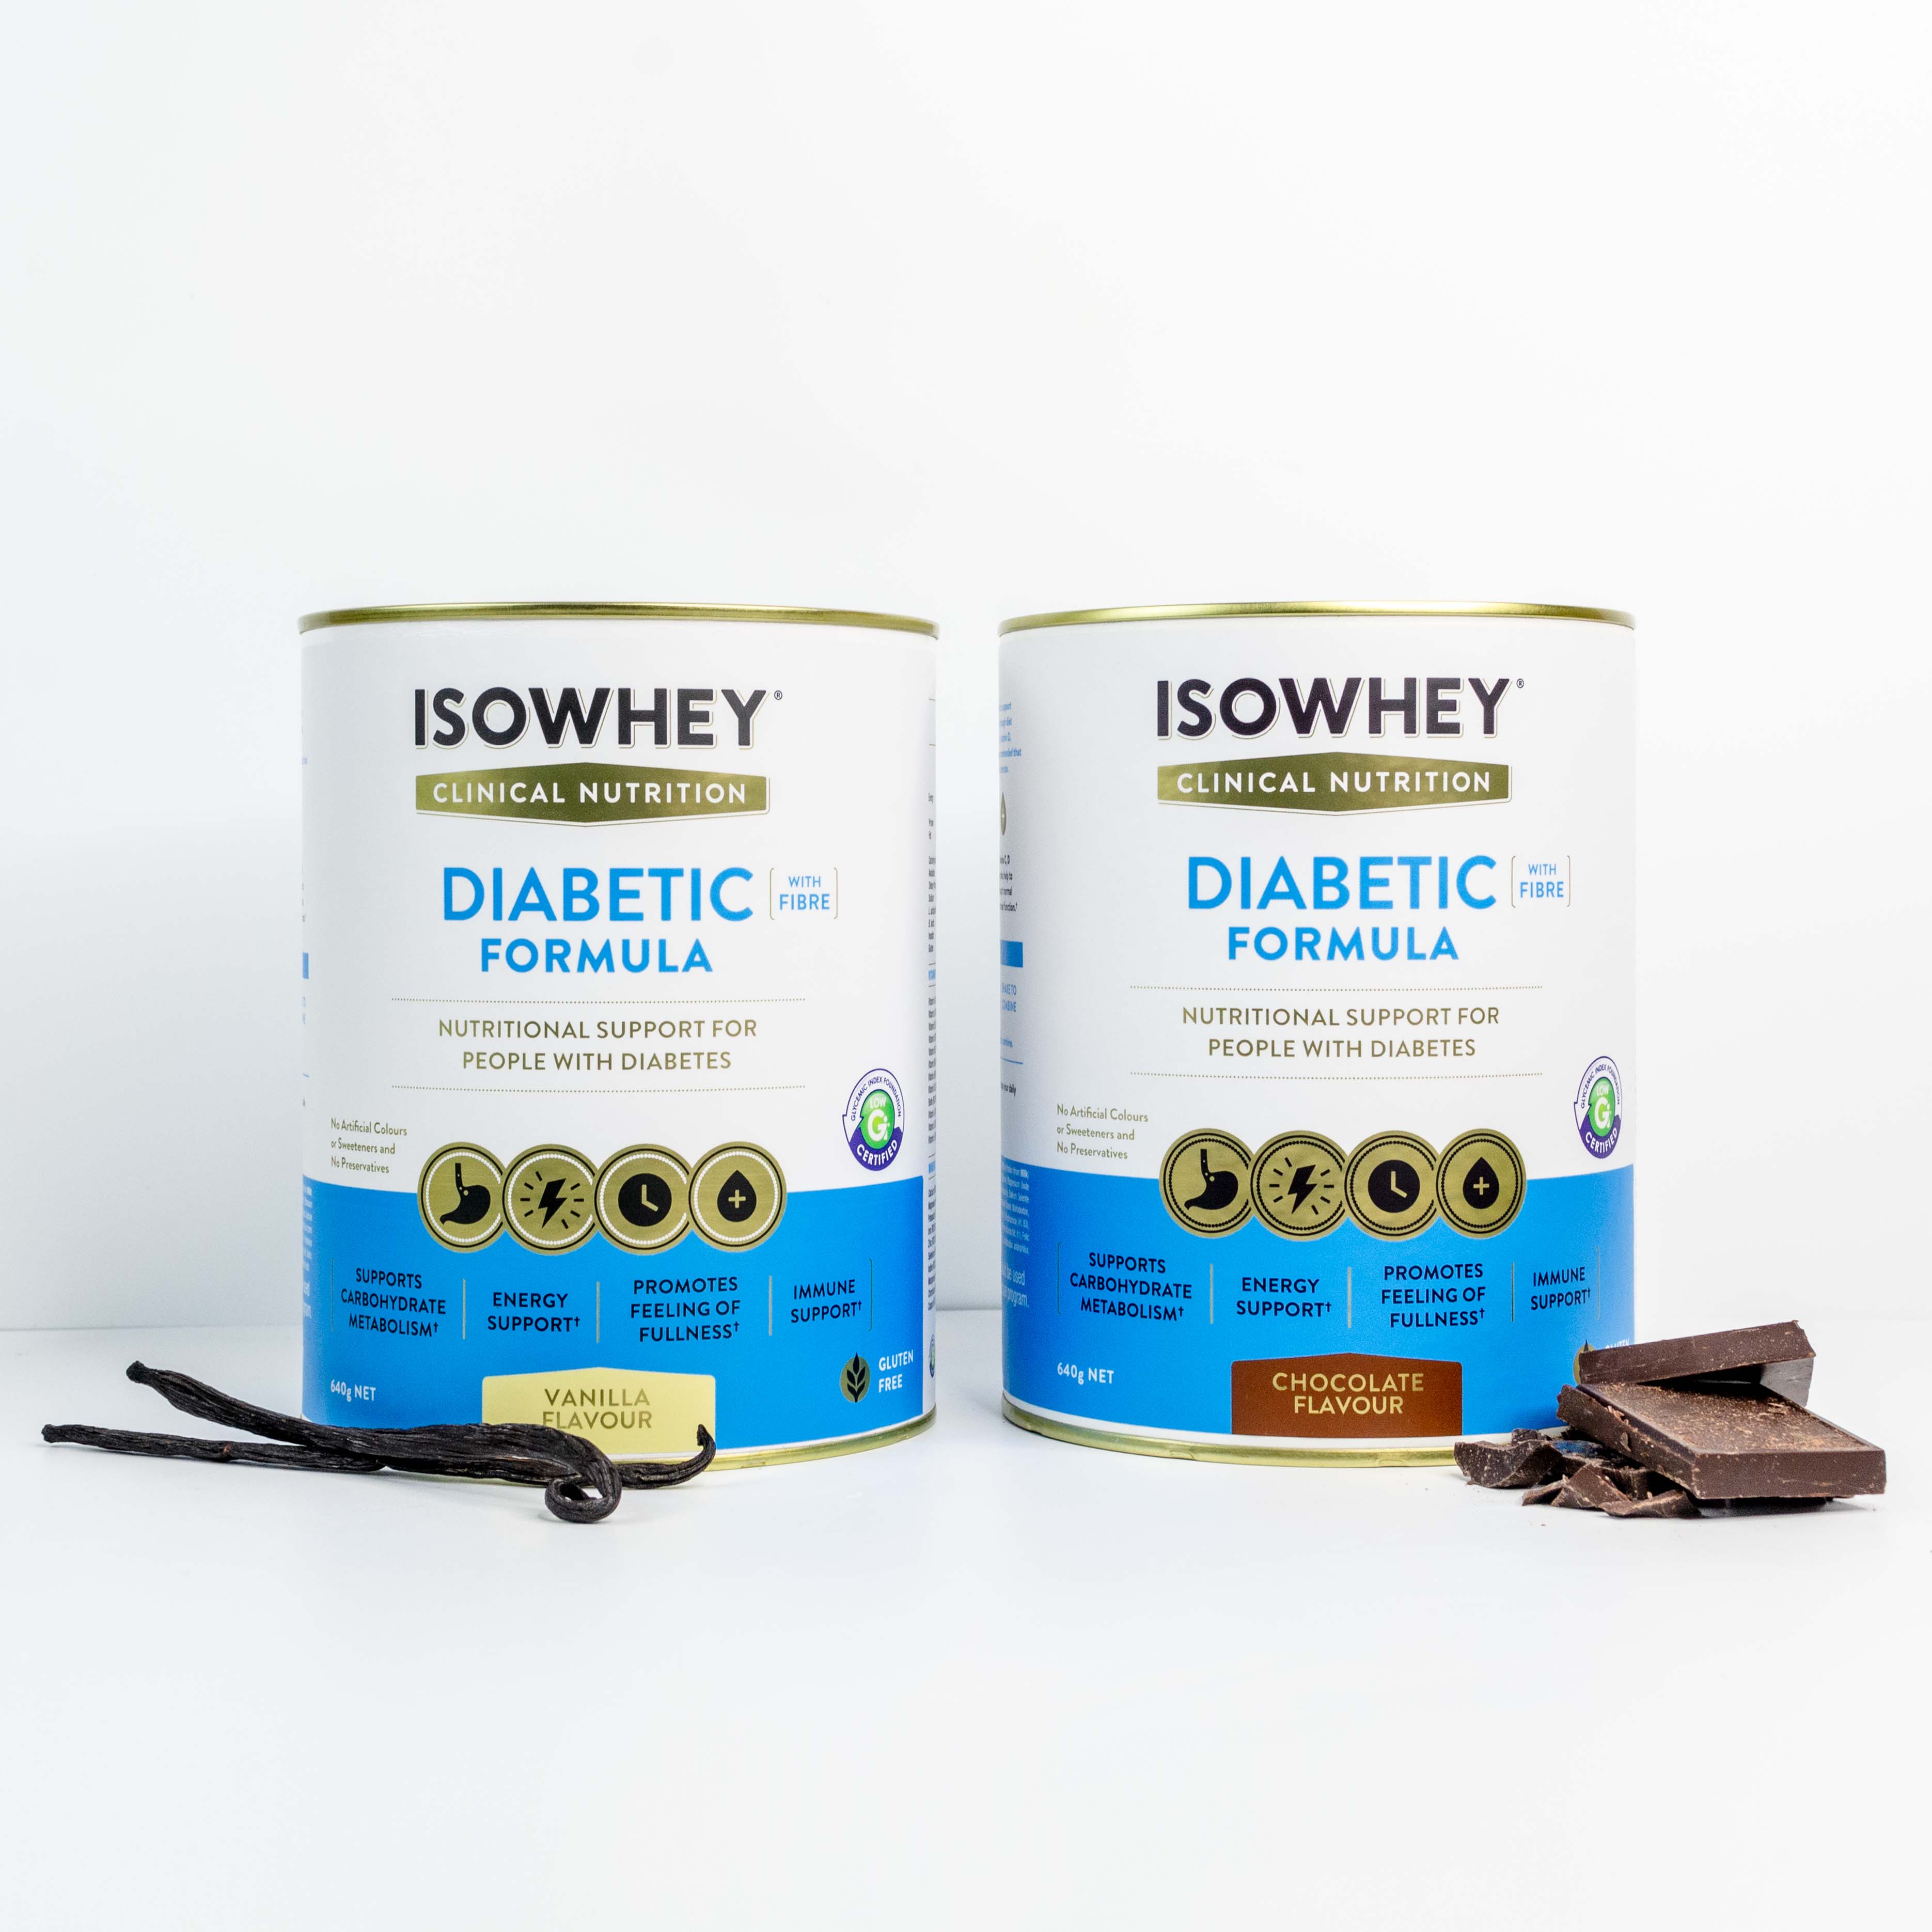 IsoWhey Clinical Nutrition Diabetic Formula Chocolate provides inositol